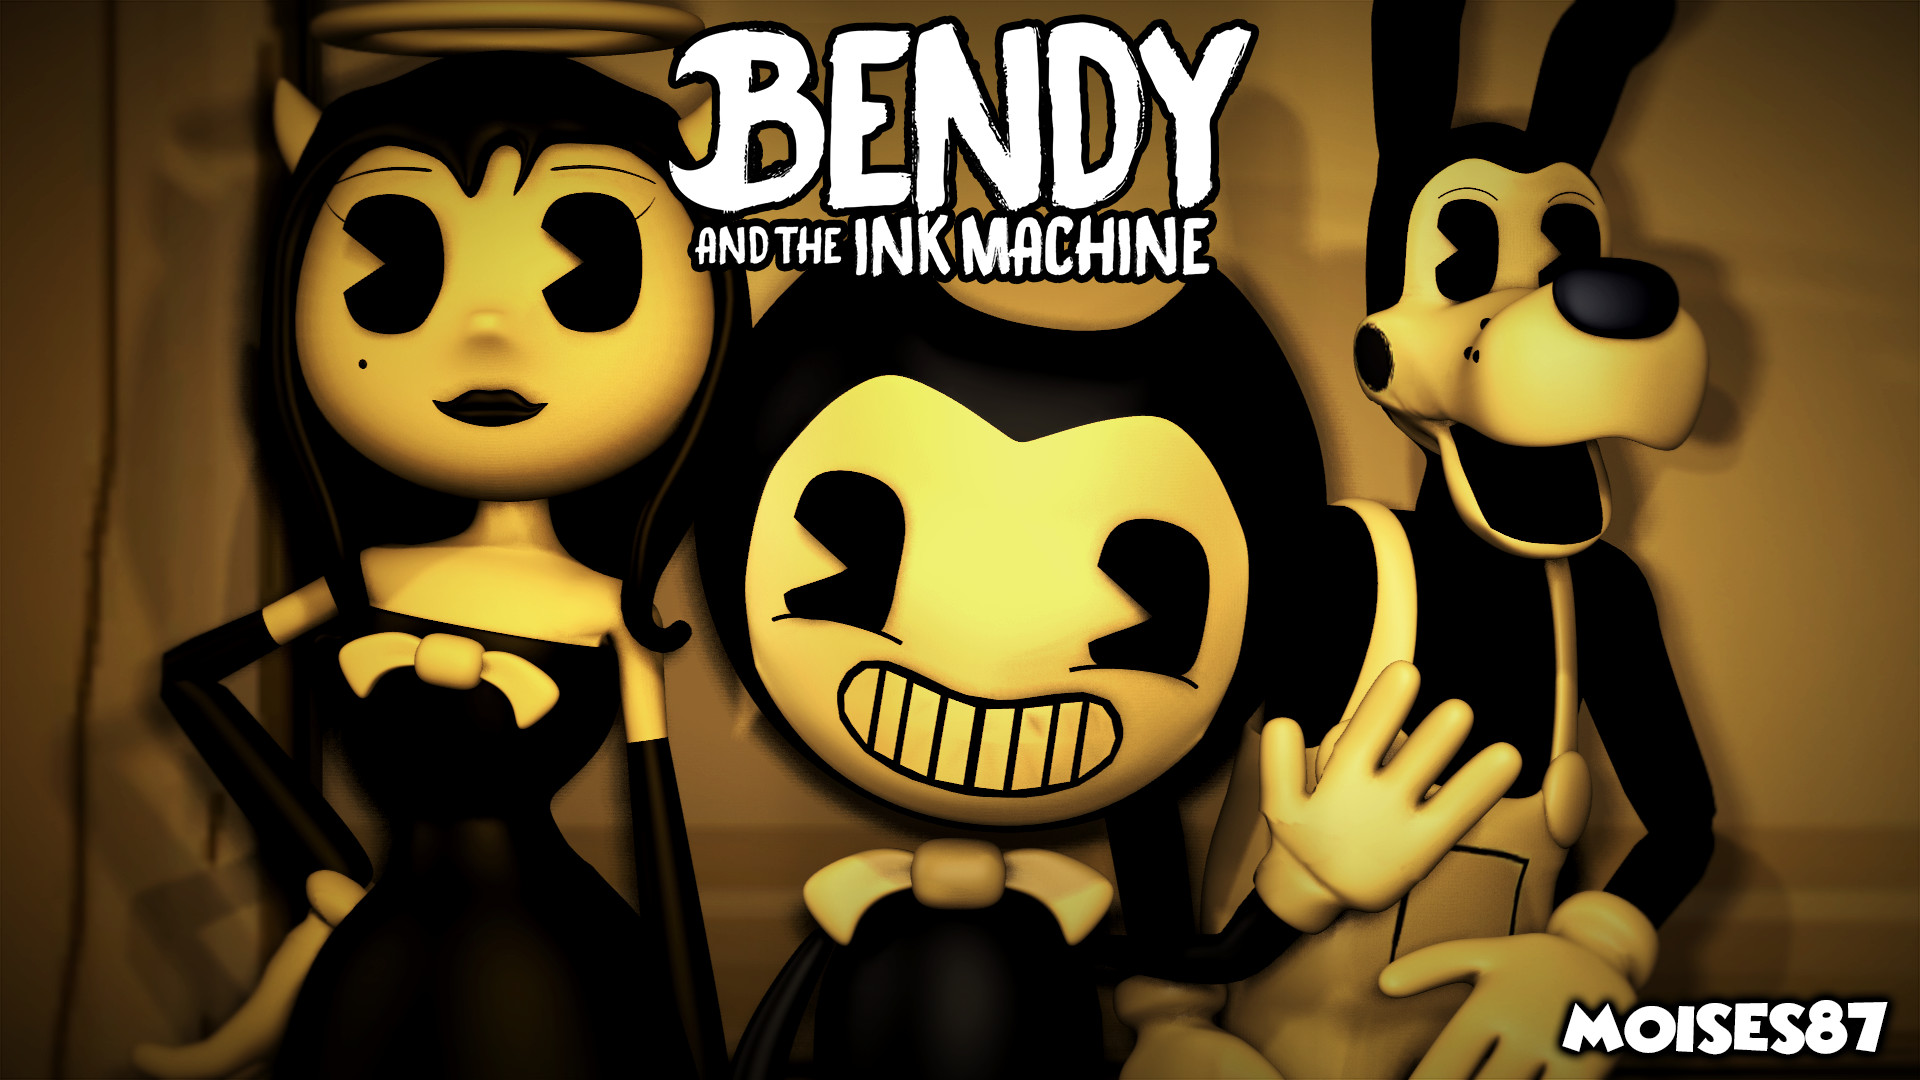 1920x1080 ... Bendy and the Ink machine Wallpaper [SFM] by Moises87